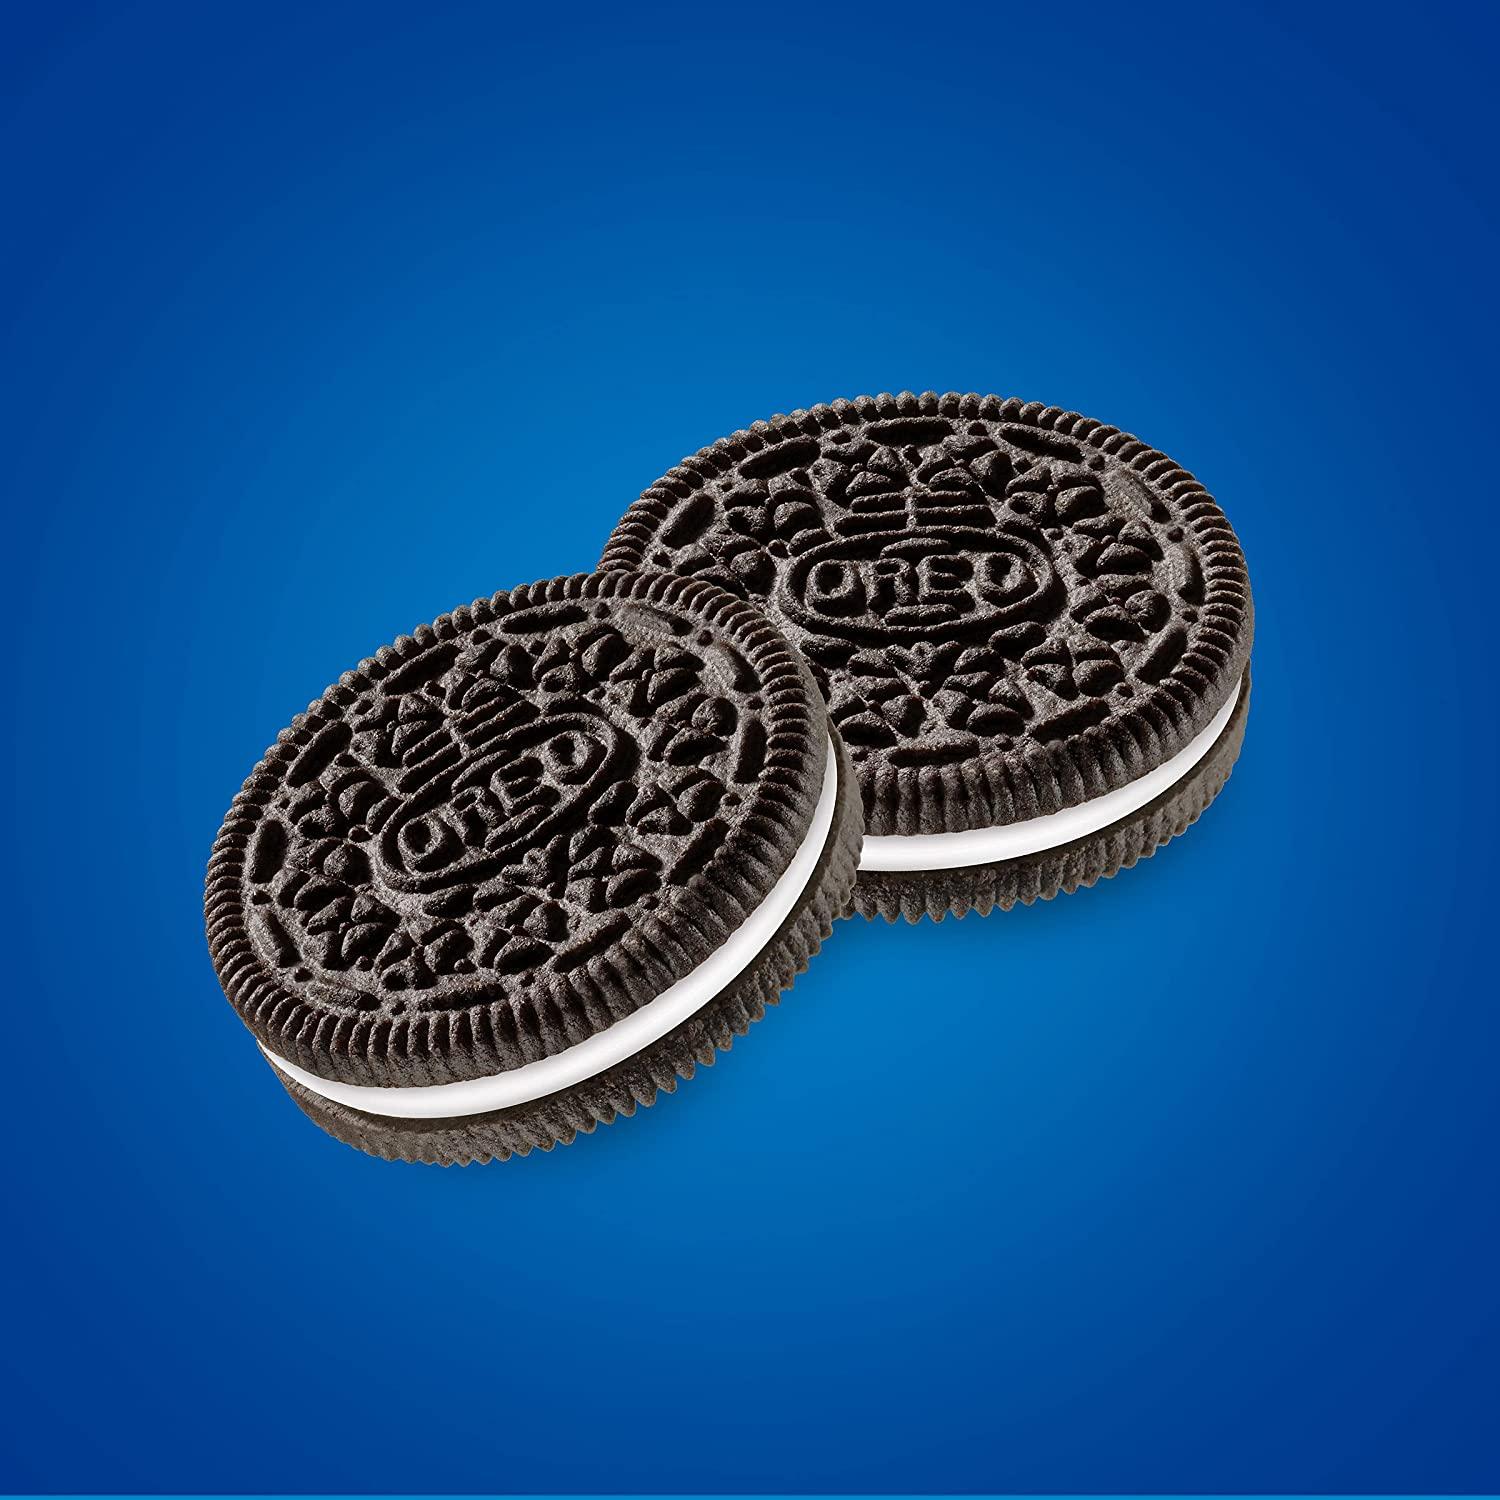 OREO Chocolate Sandwich Cookies, Party Size for $4.26 Shipped